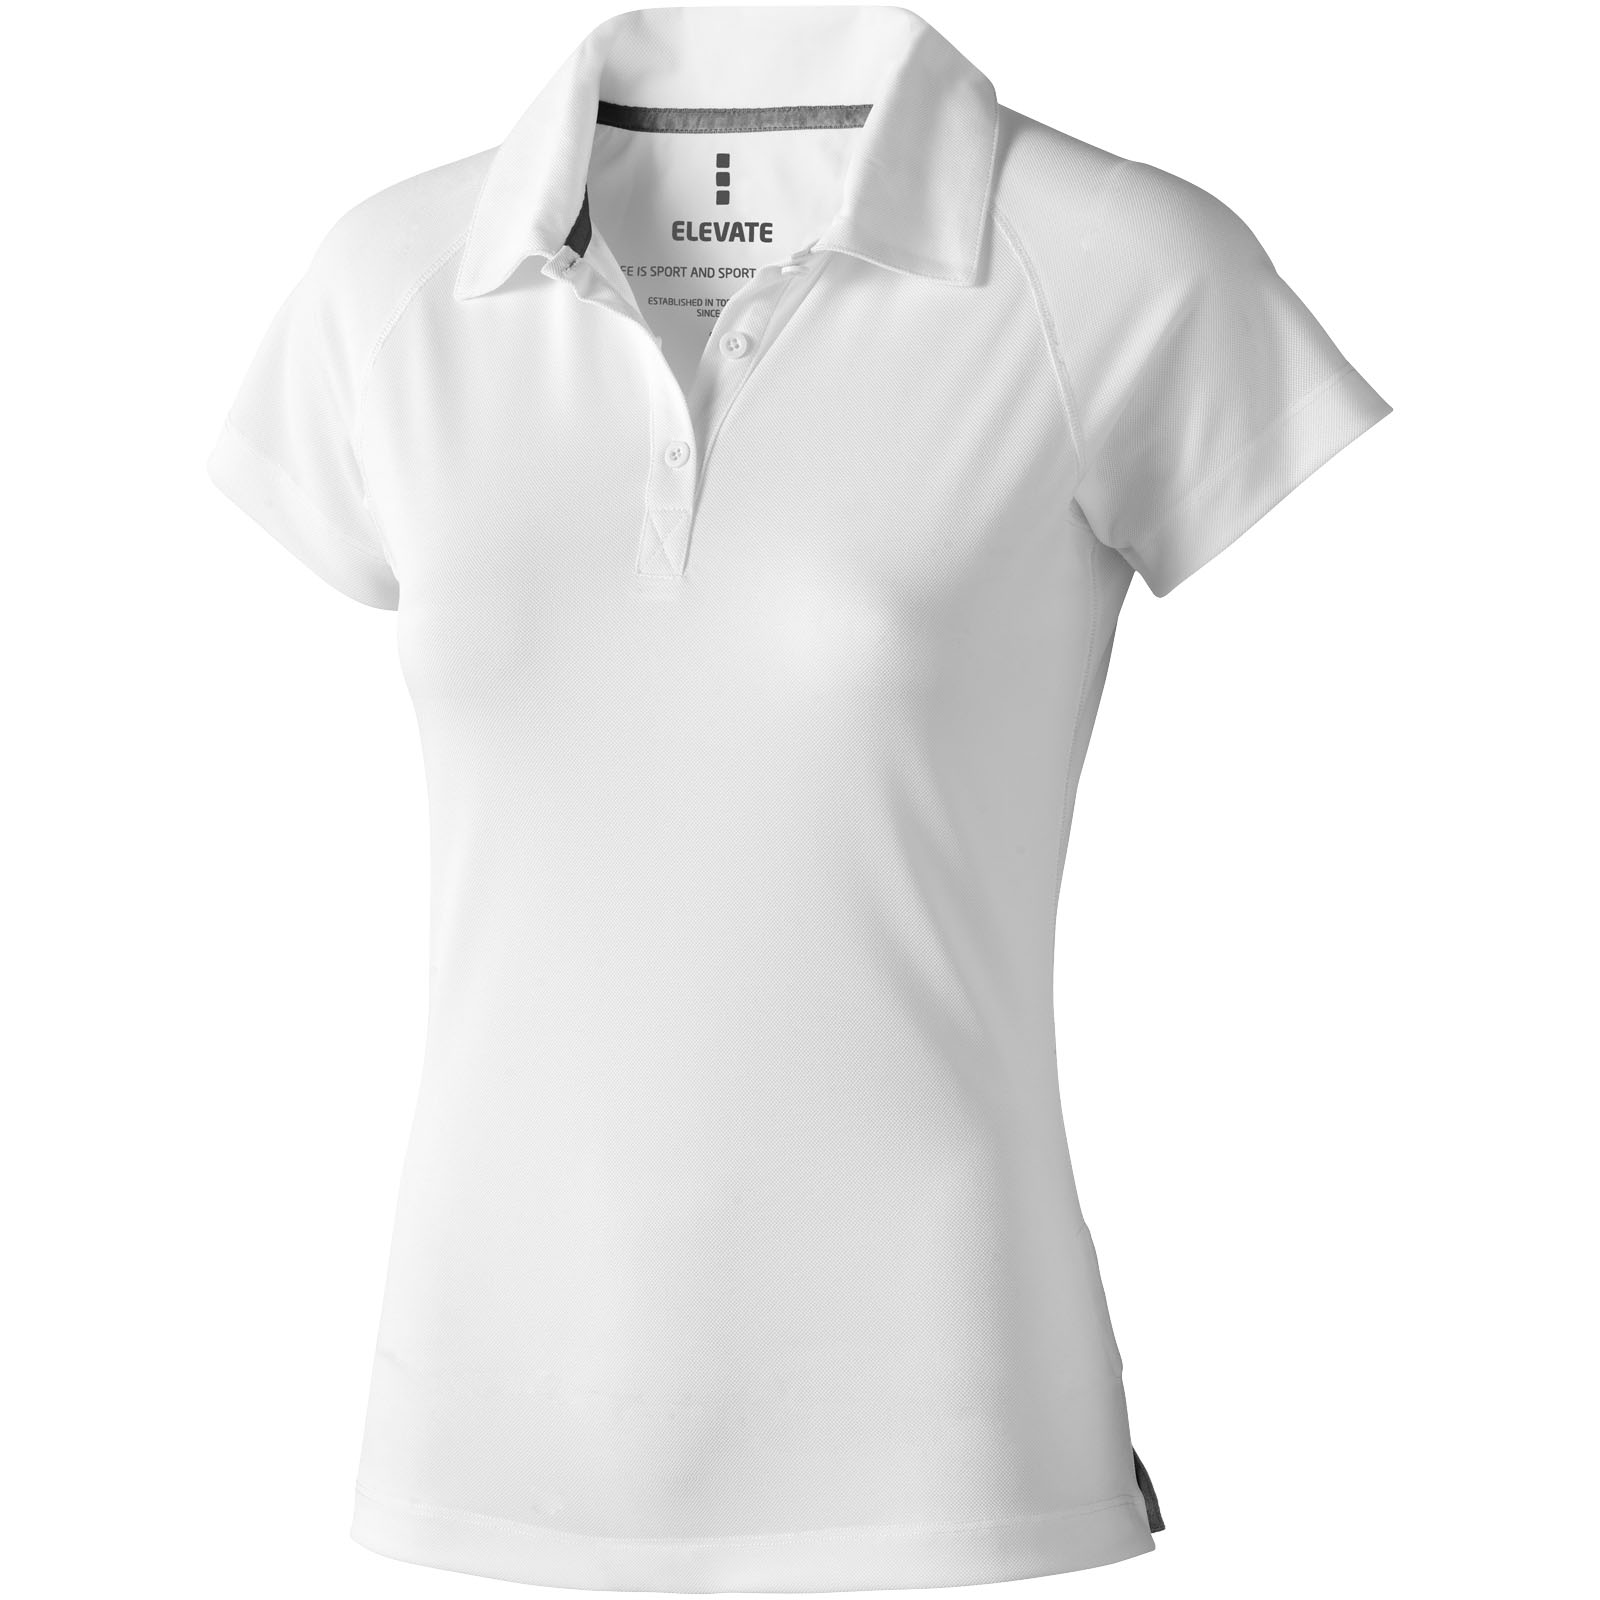 Advertising Polos - Ottawa short sleeve women's cool fit polo - 0